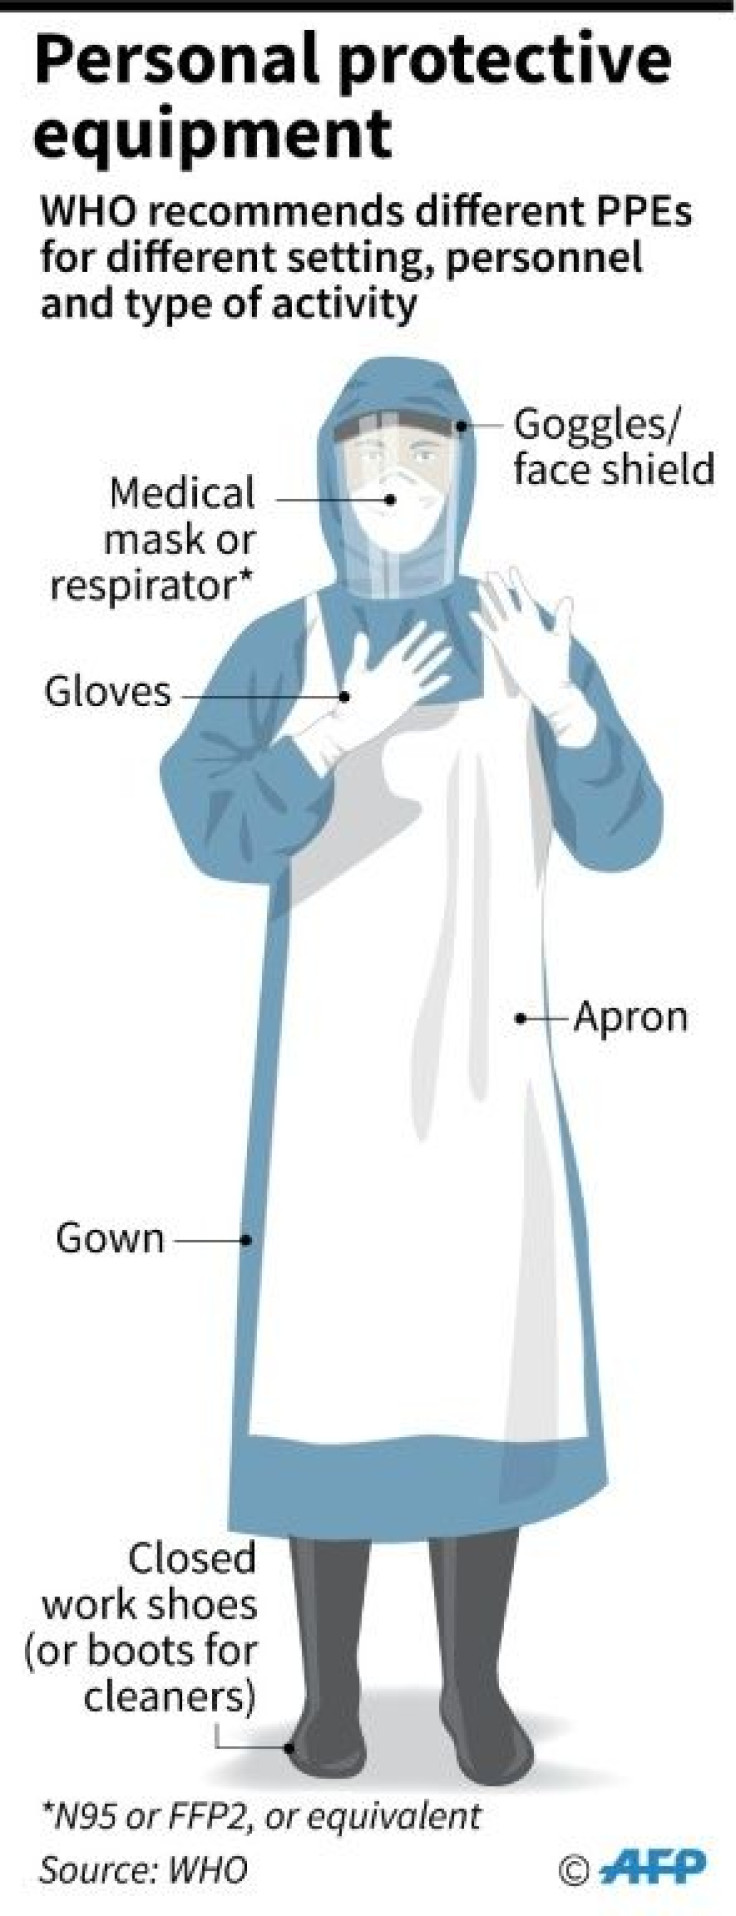 Types of personal protective equipment recommended by the World Health Organization for COVID-19, according to different setting, personnel or type of activity.